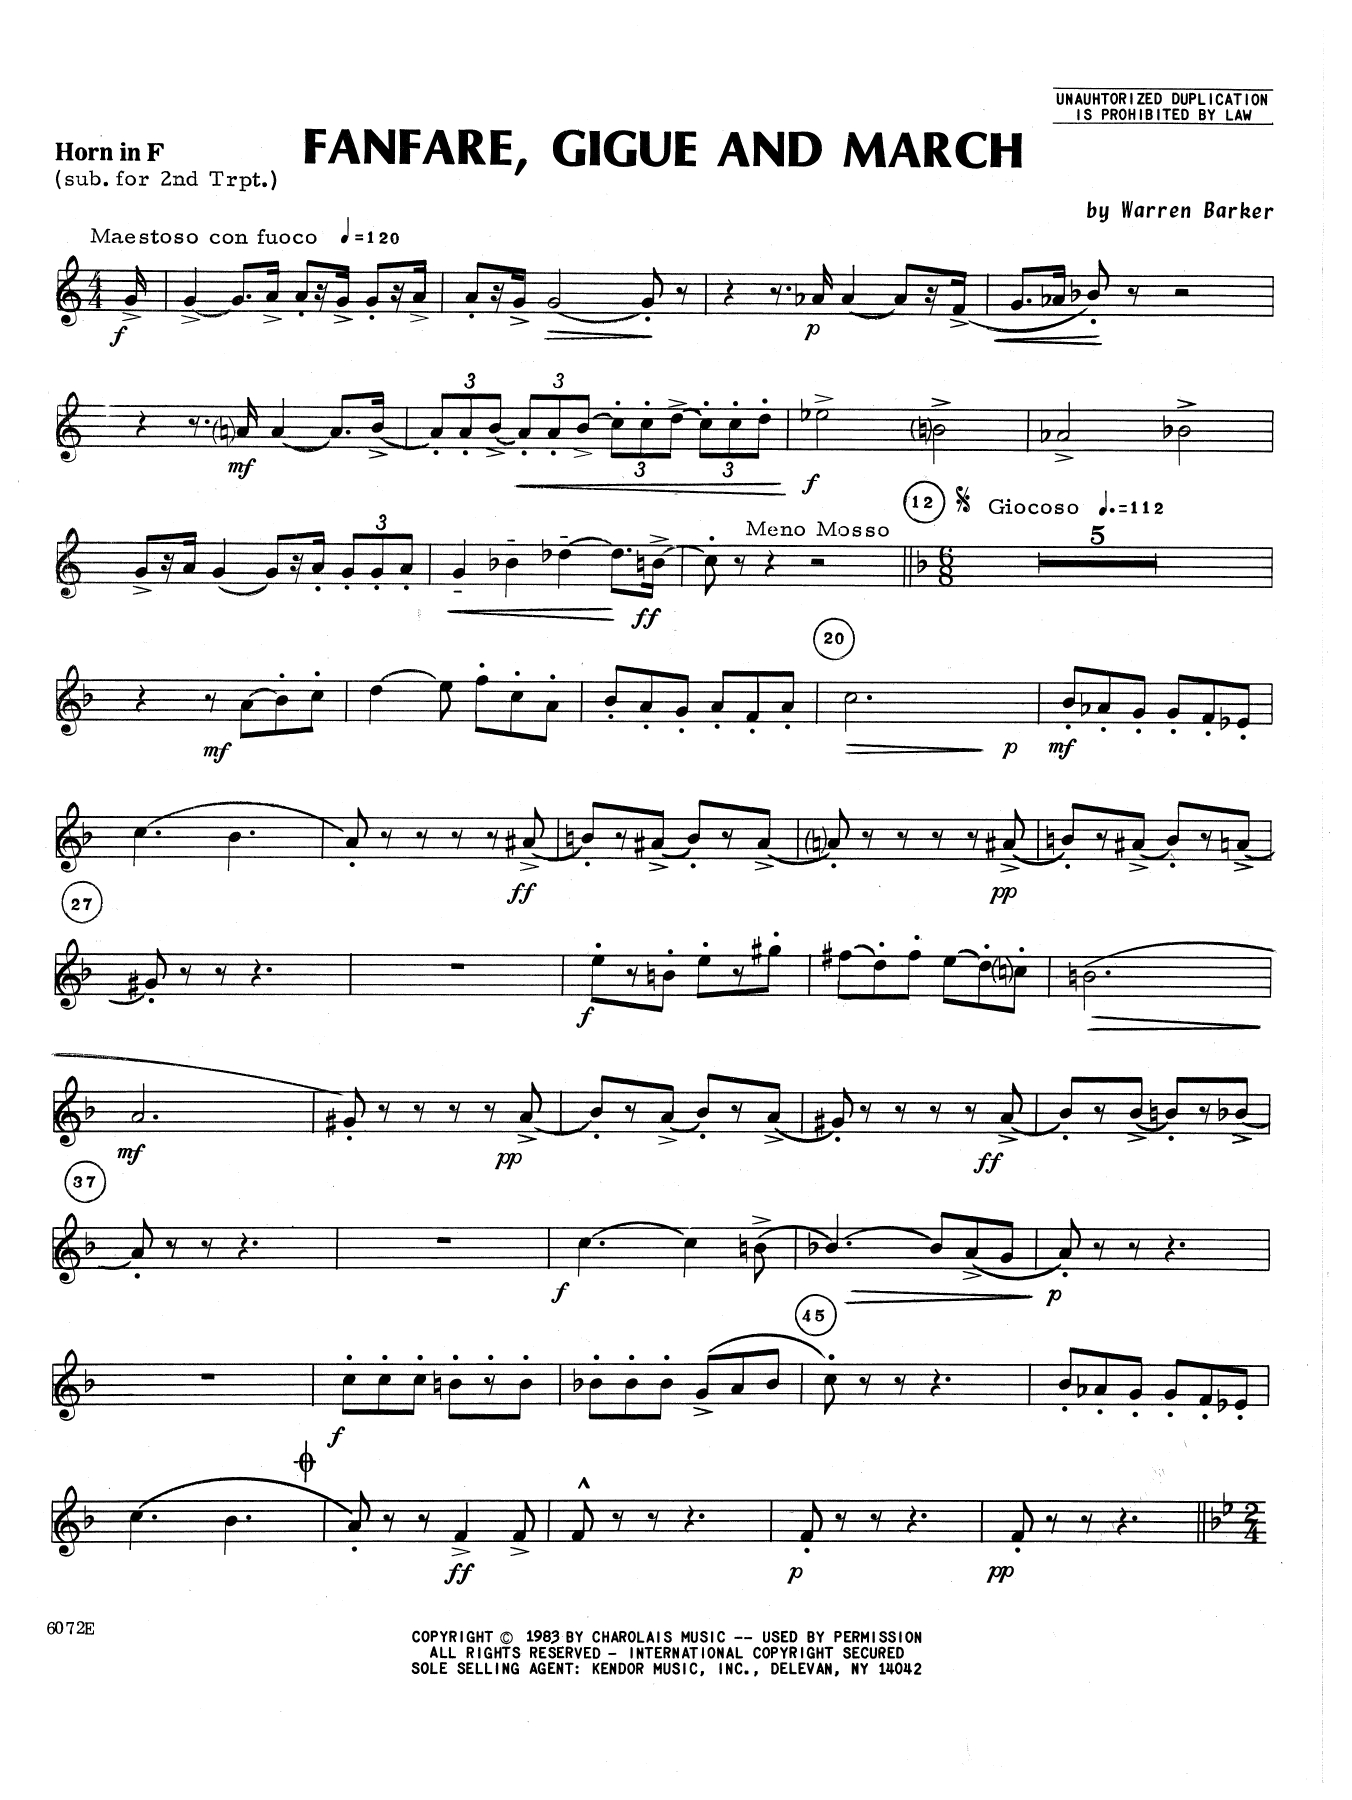 Download Barker Fanfare, Gigue And March - Horn in F Sheet Music